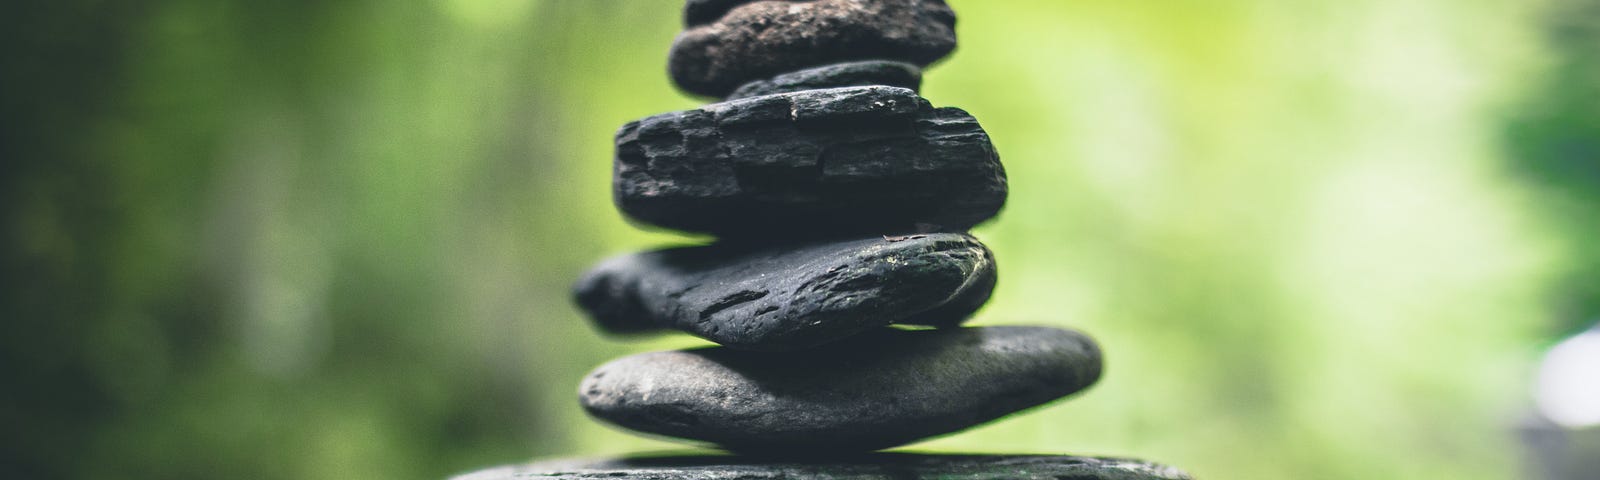 A beautifully photo’ed set of dark flat stones balanced from large to small in a tower placed on a rock surface in the open greenery in daylight.